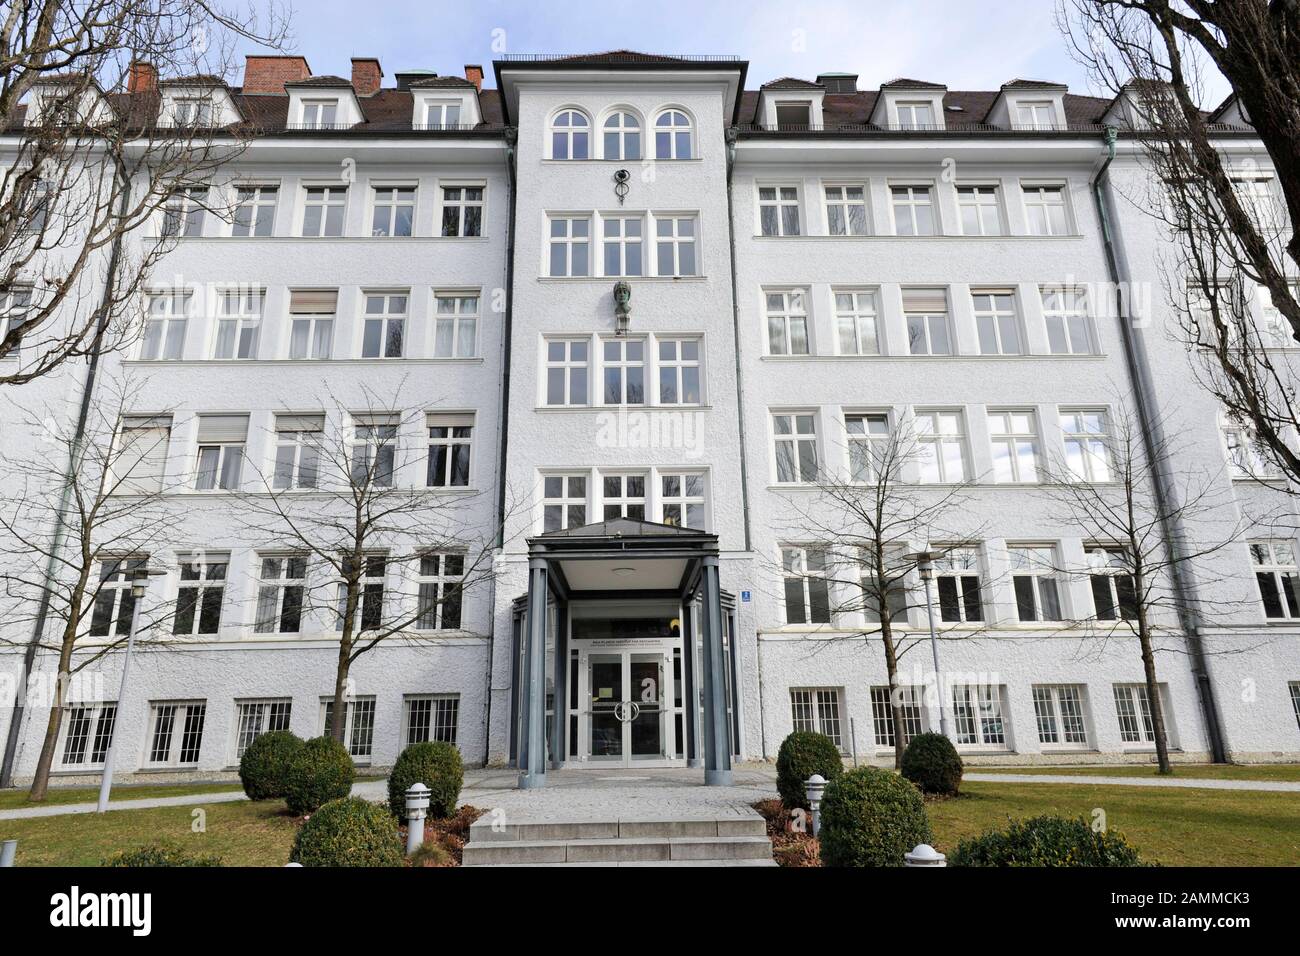 Max Planck Institute (MPI) for Psychiatry - German Research Institute for Psychiatry at Kraepelinstraße 2 in Schwabing. [automated translation] Stock Photo